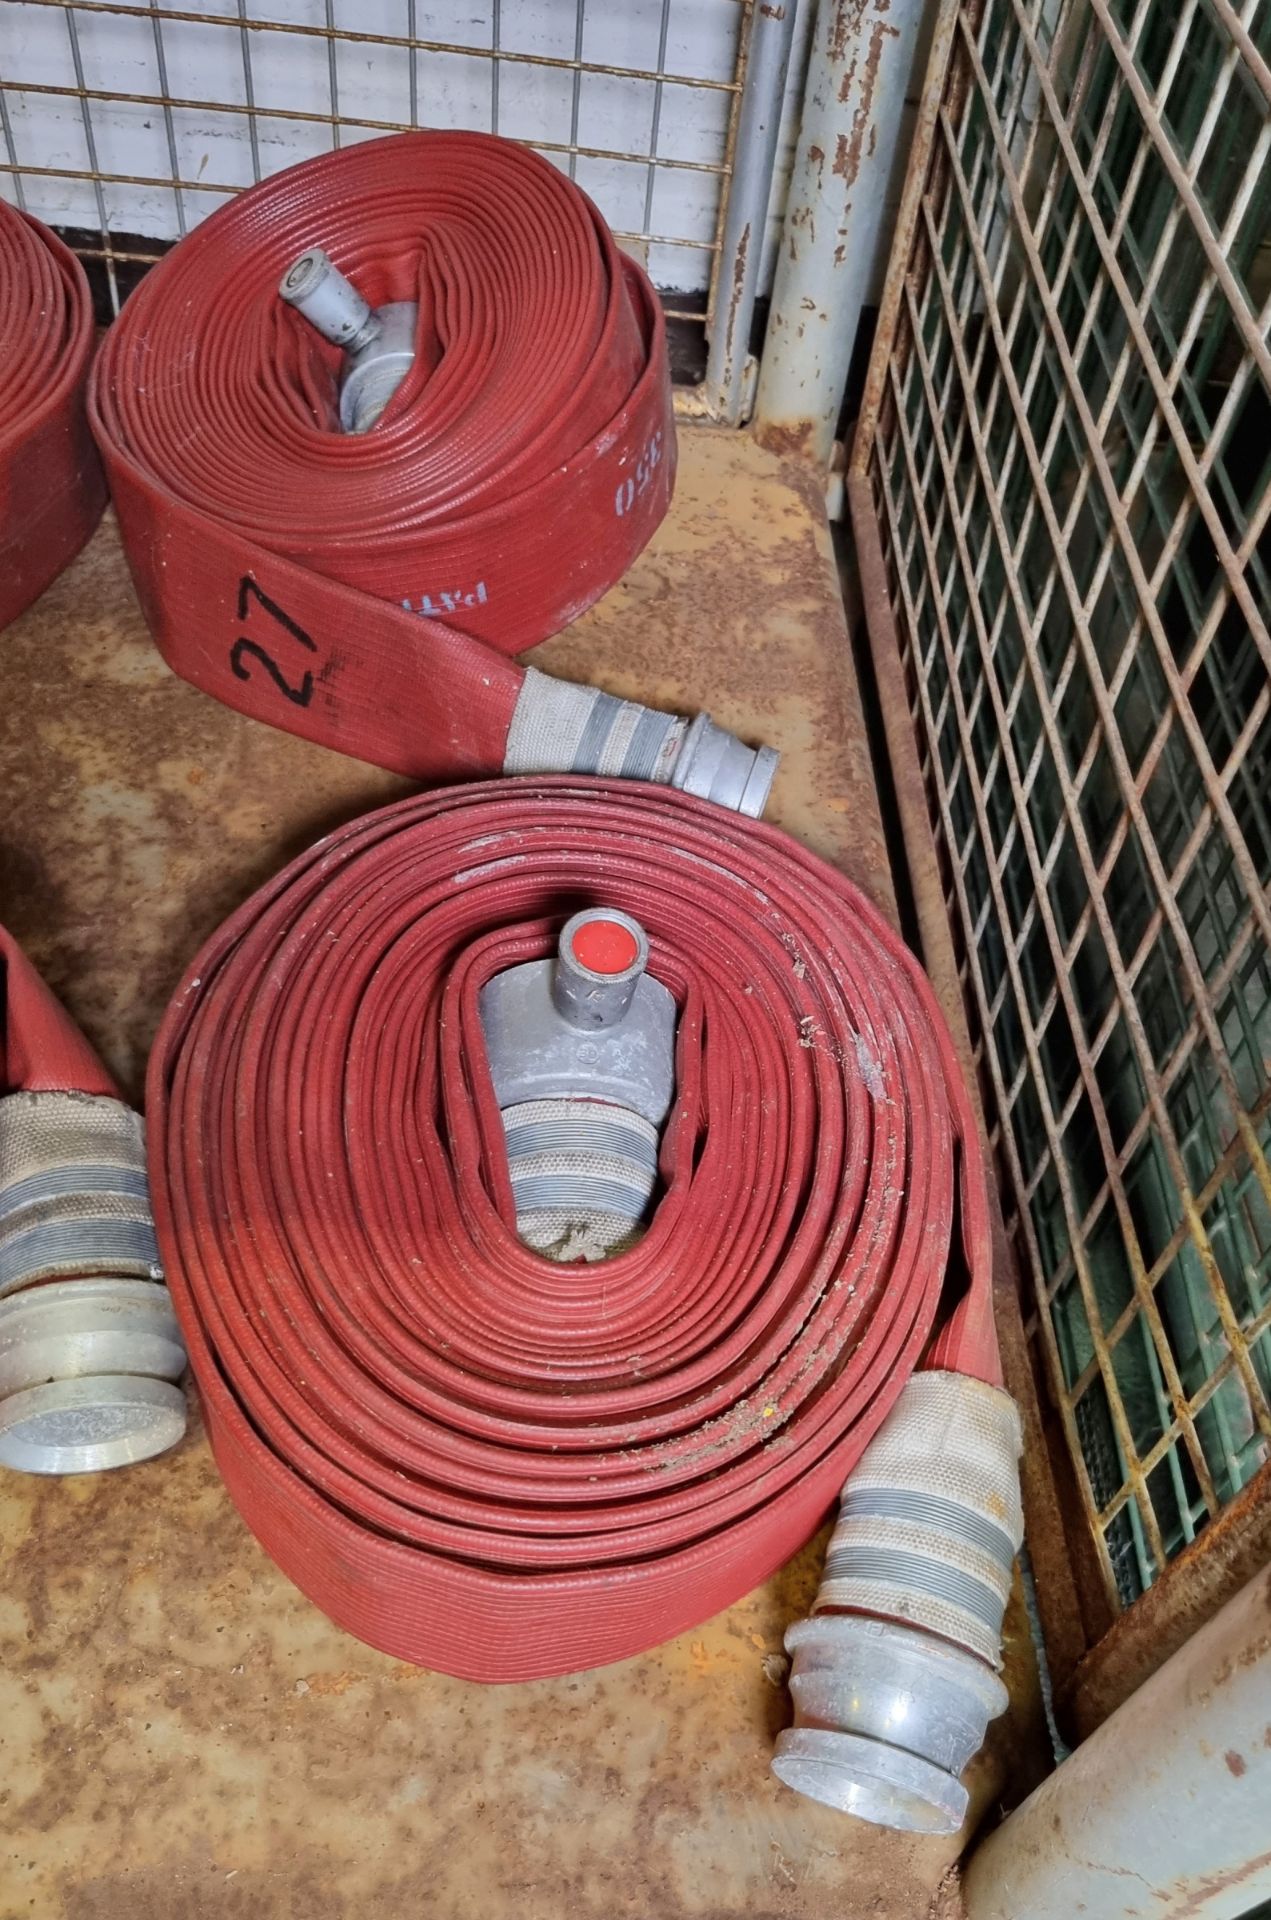 6x Angus Duraline 64mm lay flat hoses with couplings - approx 15m in length - Bild 3 aus 5